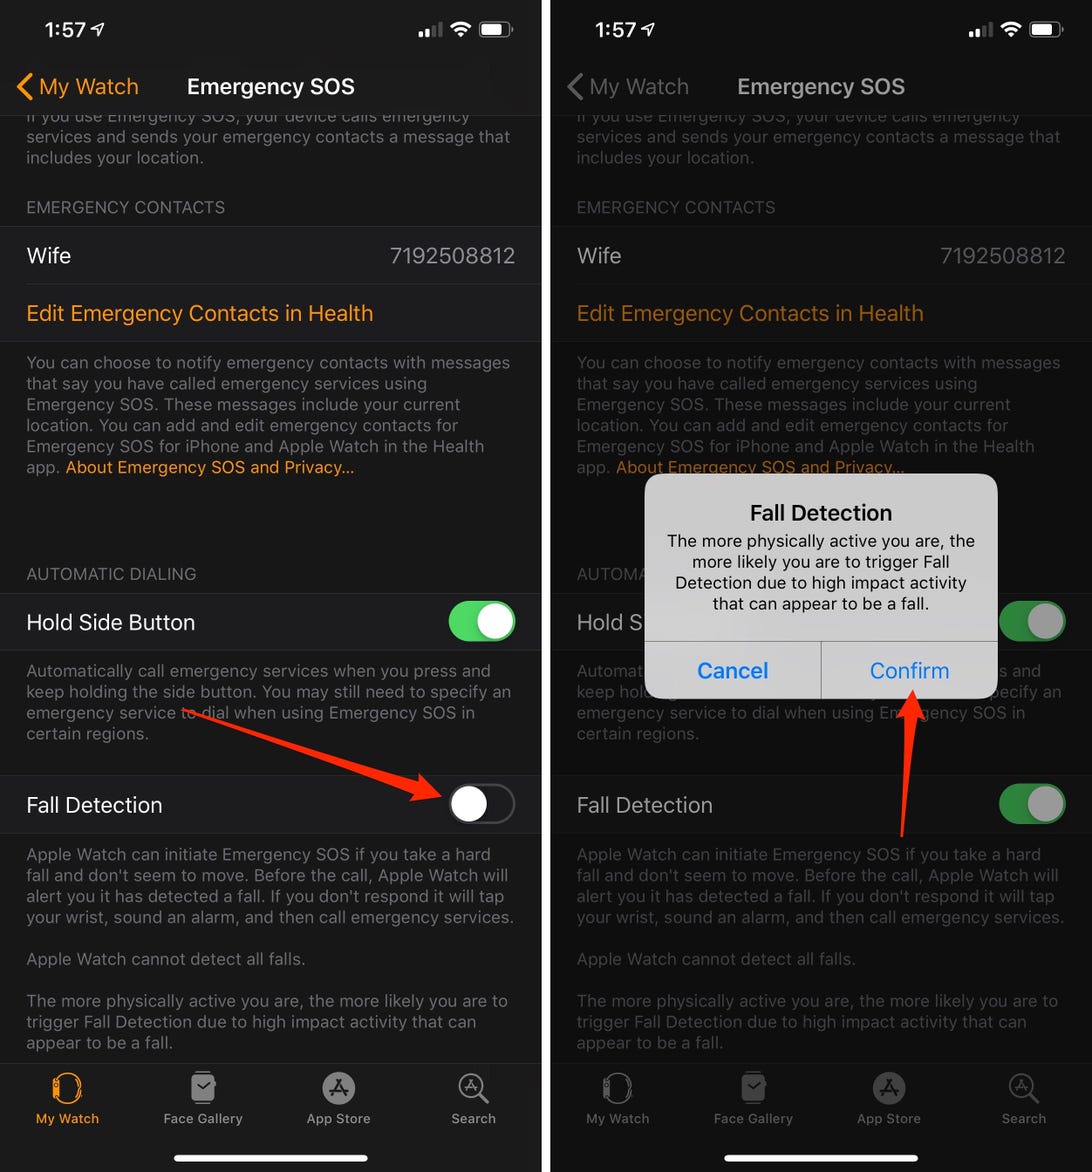 Apple Watch Series 4: How to enable fall detection